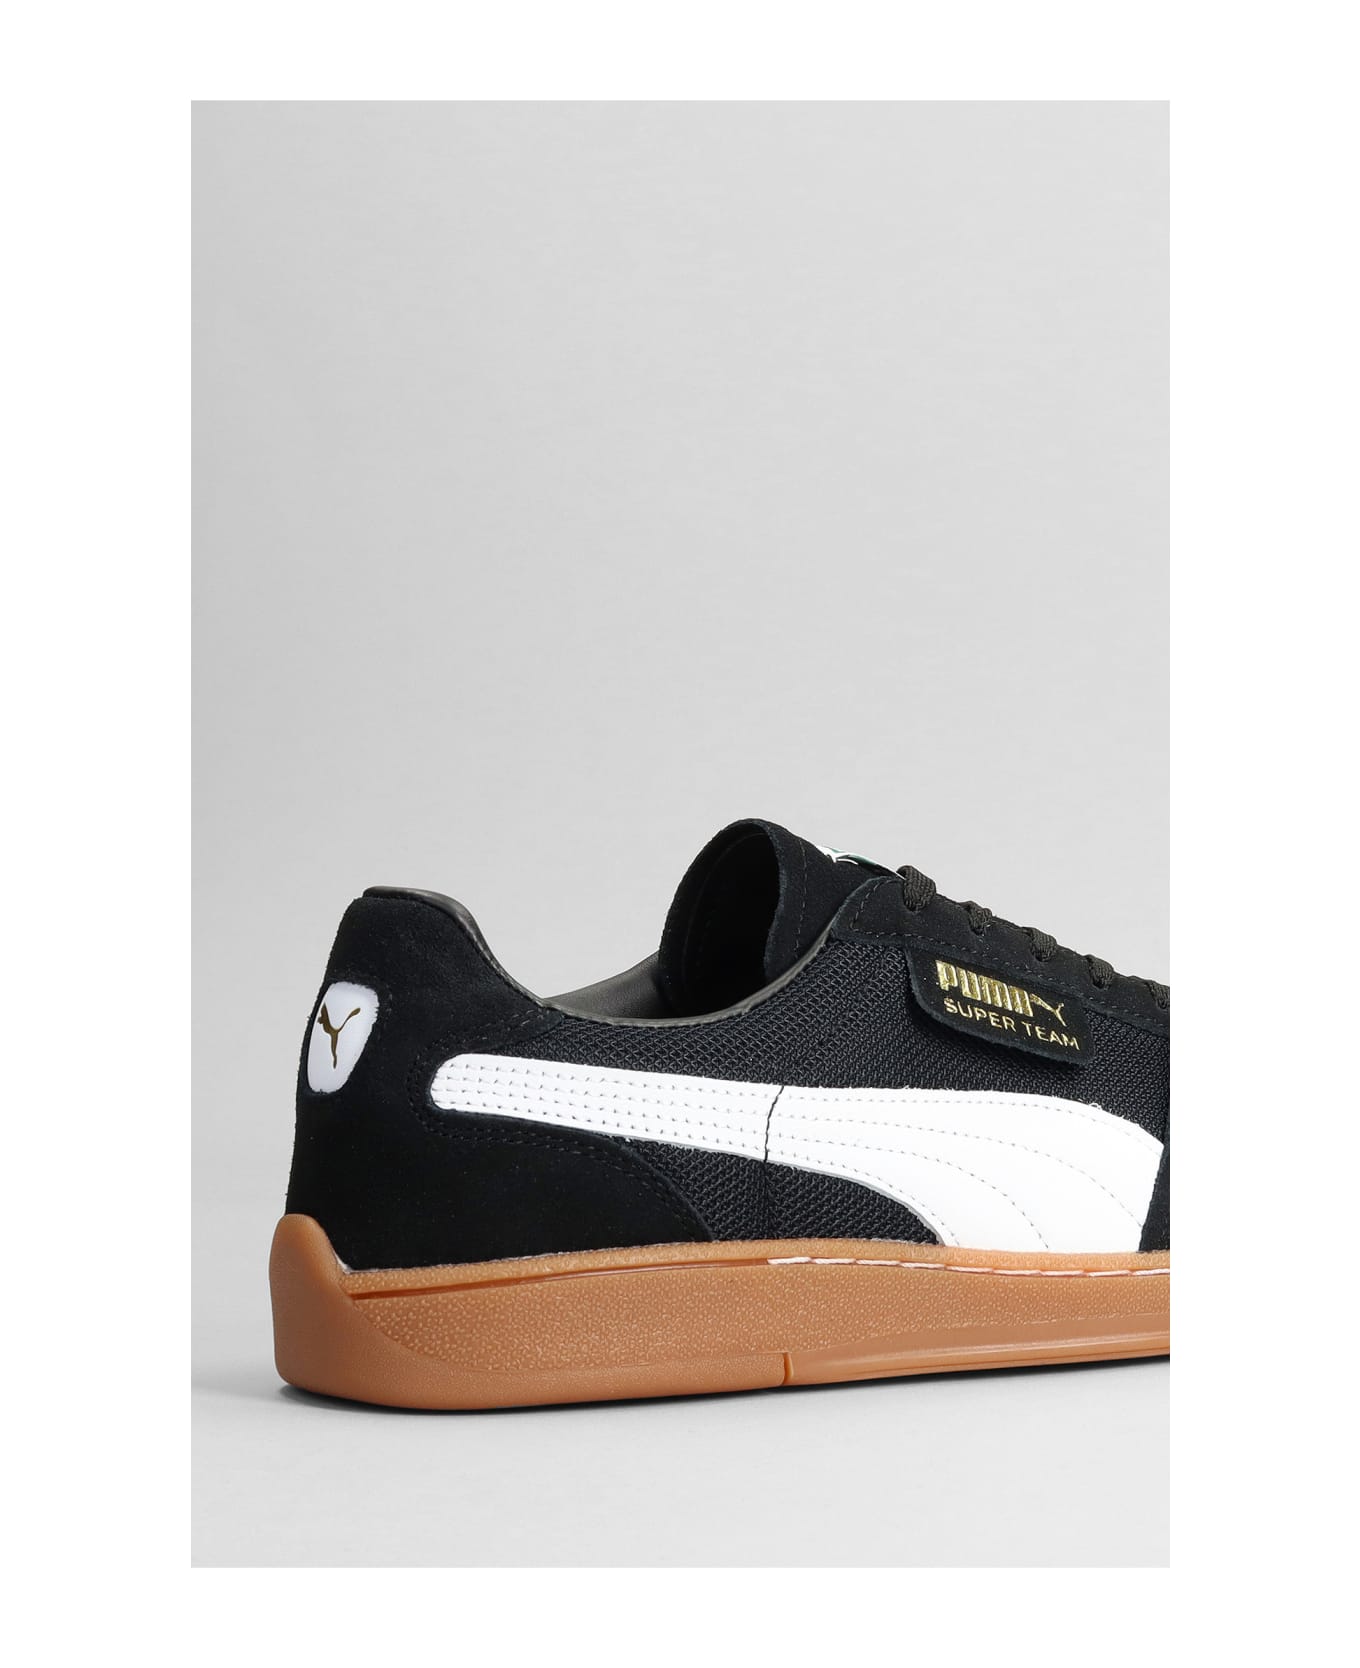 Puma Super Team Og Sneakers In Black Suede And Fabric - BLACK/WHITE スニーカー